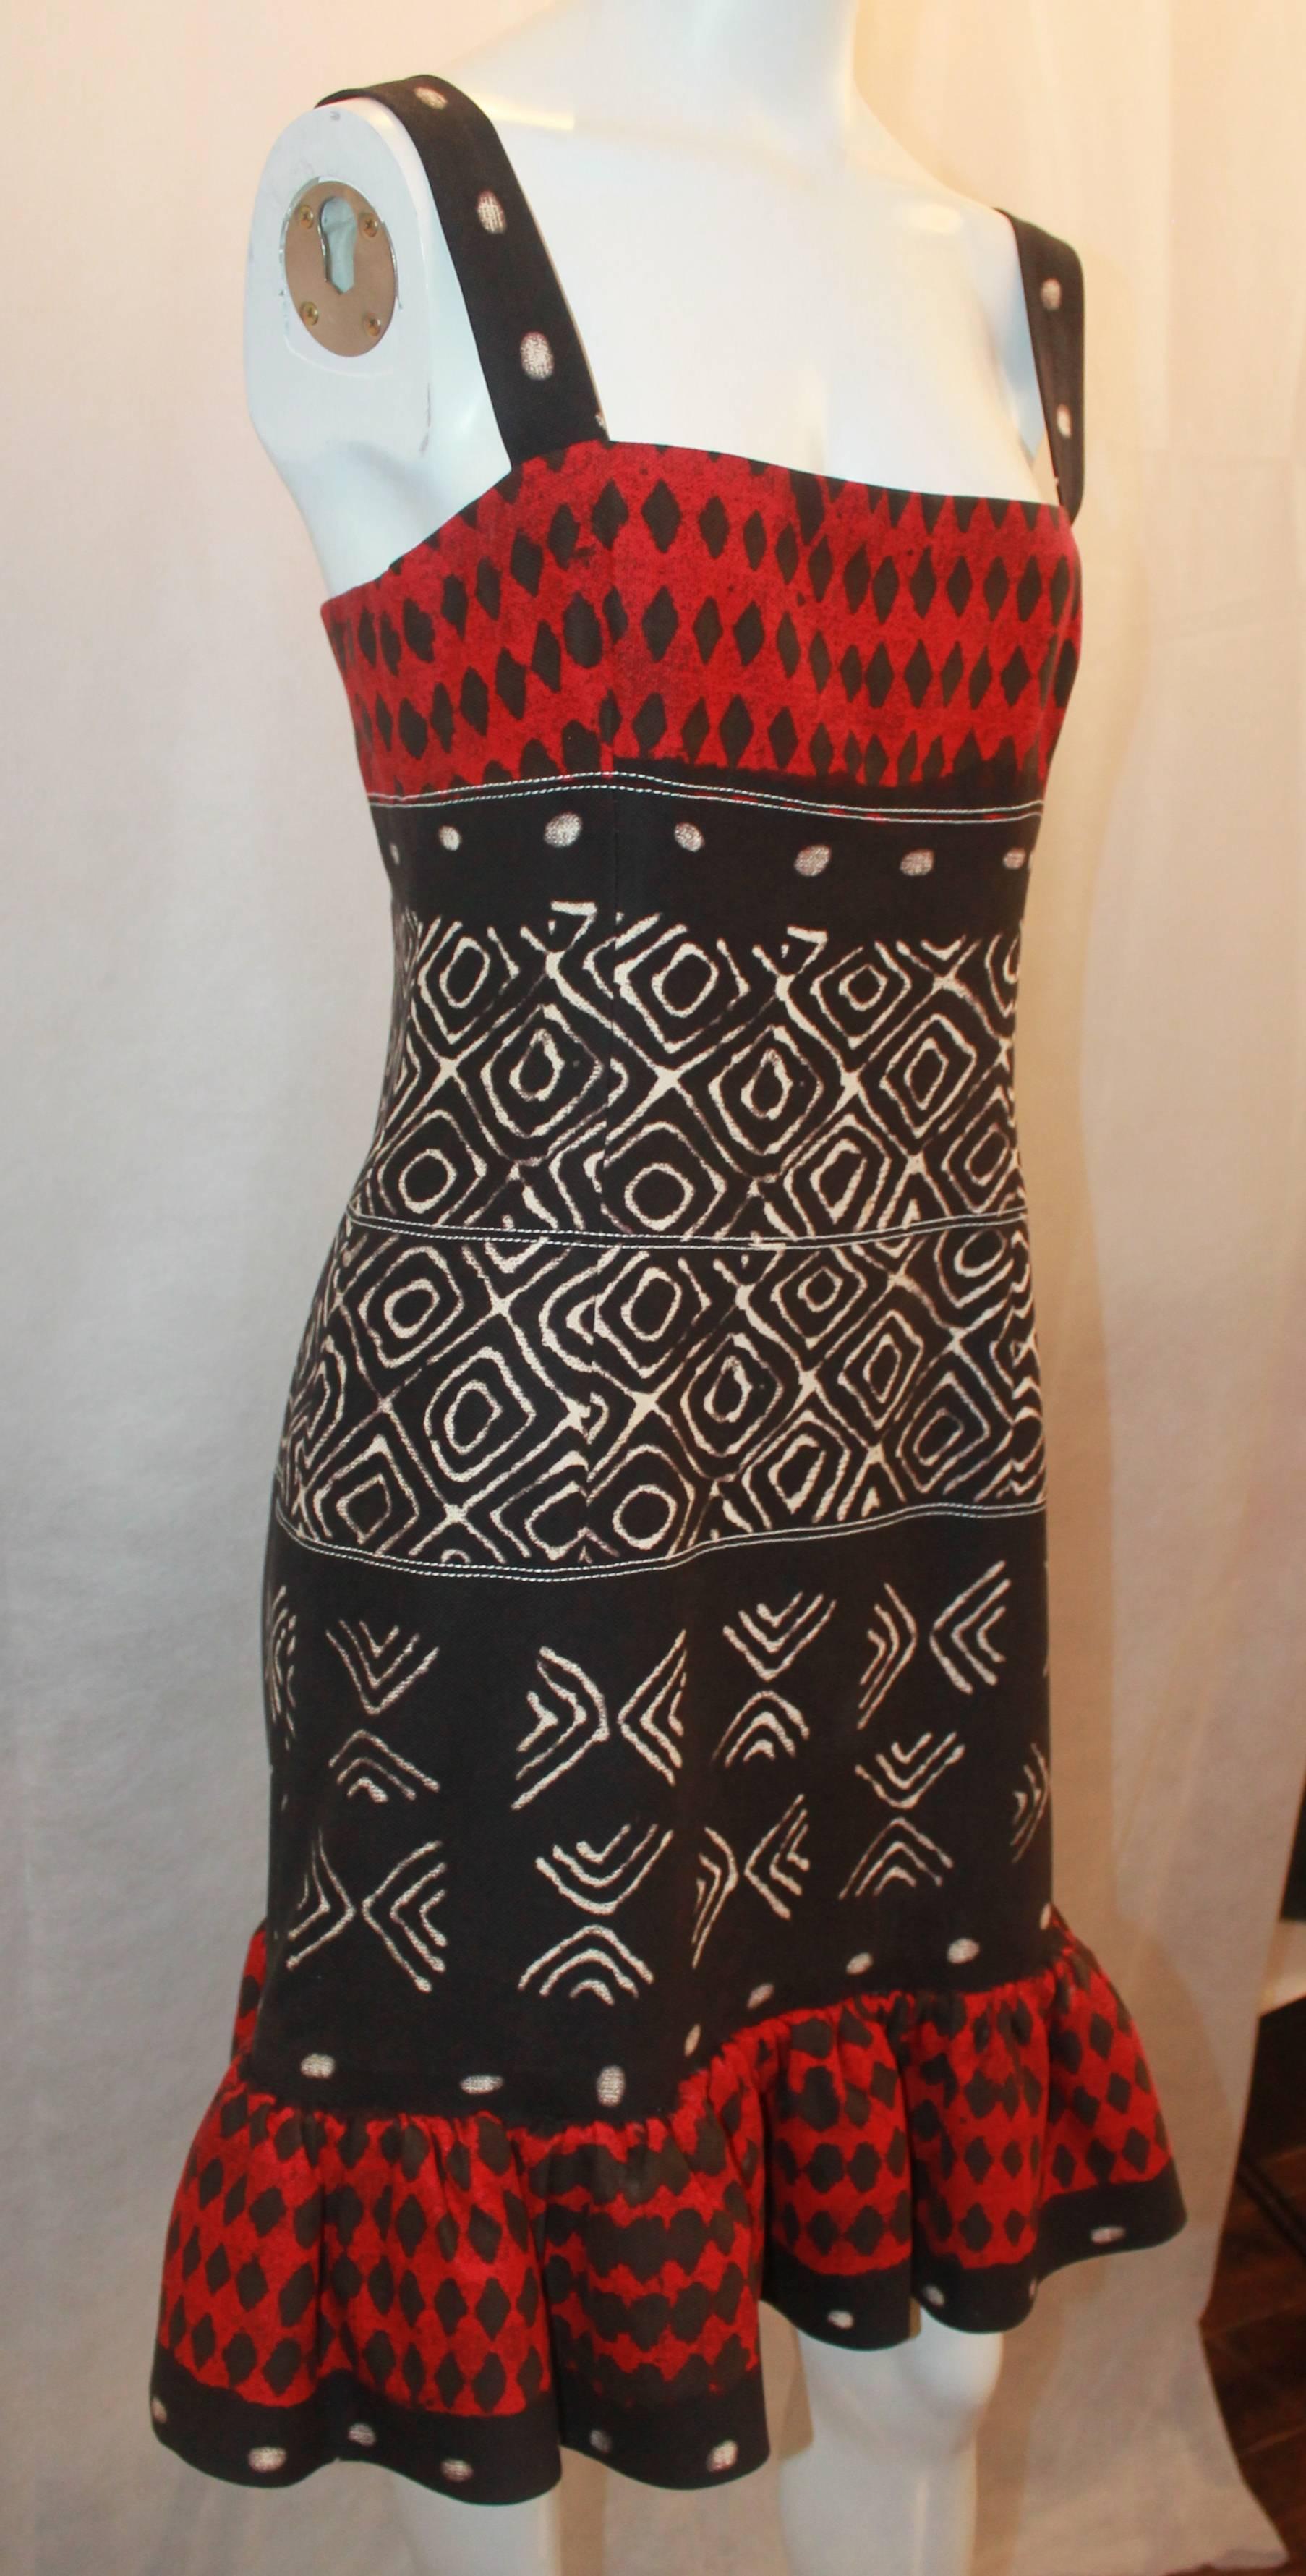 Oscar de la Renta Red, Black, & Ivory Cotton Sleeveless Tribal Print Dress - 8.  This adorable Oscar dress is in excellent condition.  It features a lovely red, black, and ivory cotton ivory print, a bottom ruffle, varying geometric designs